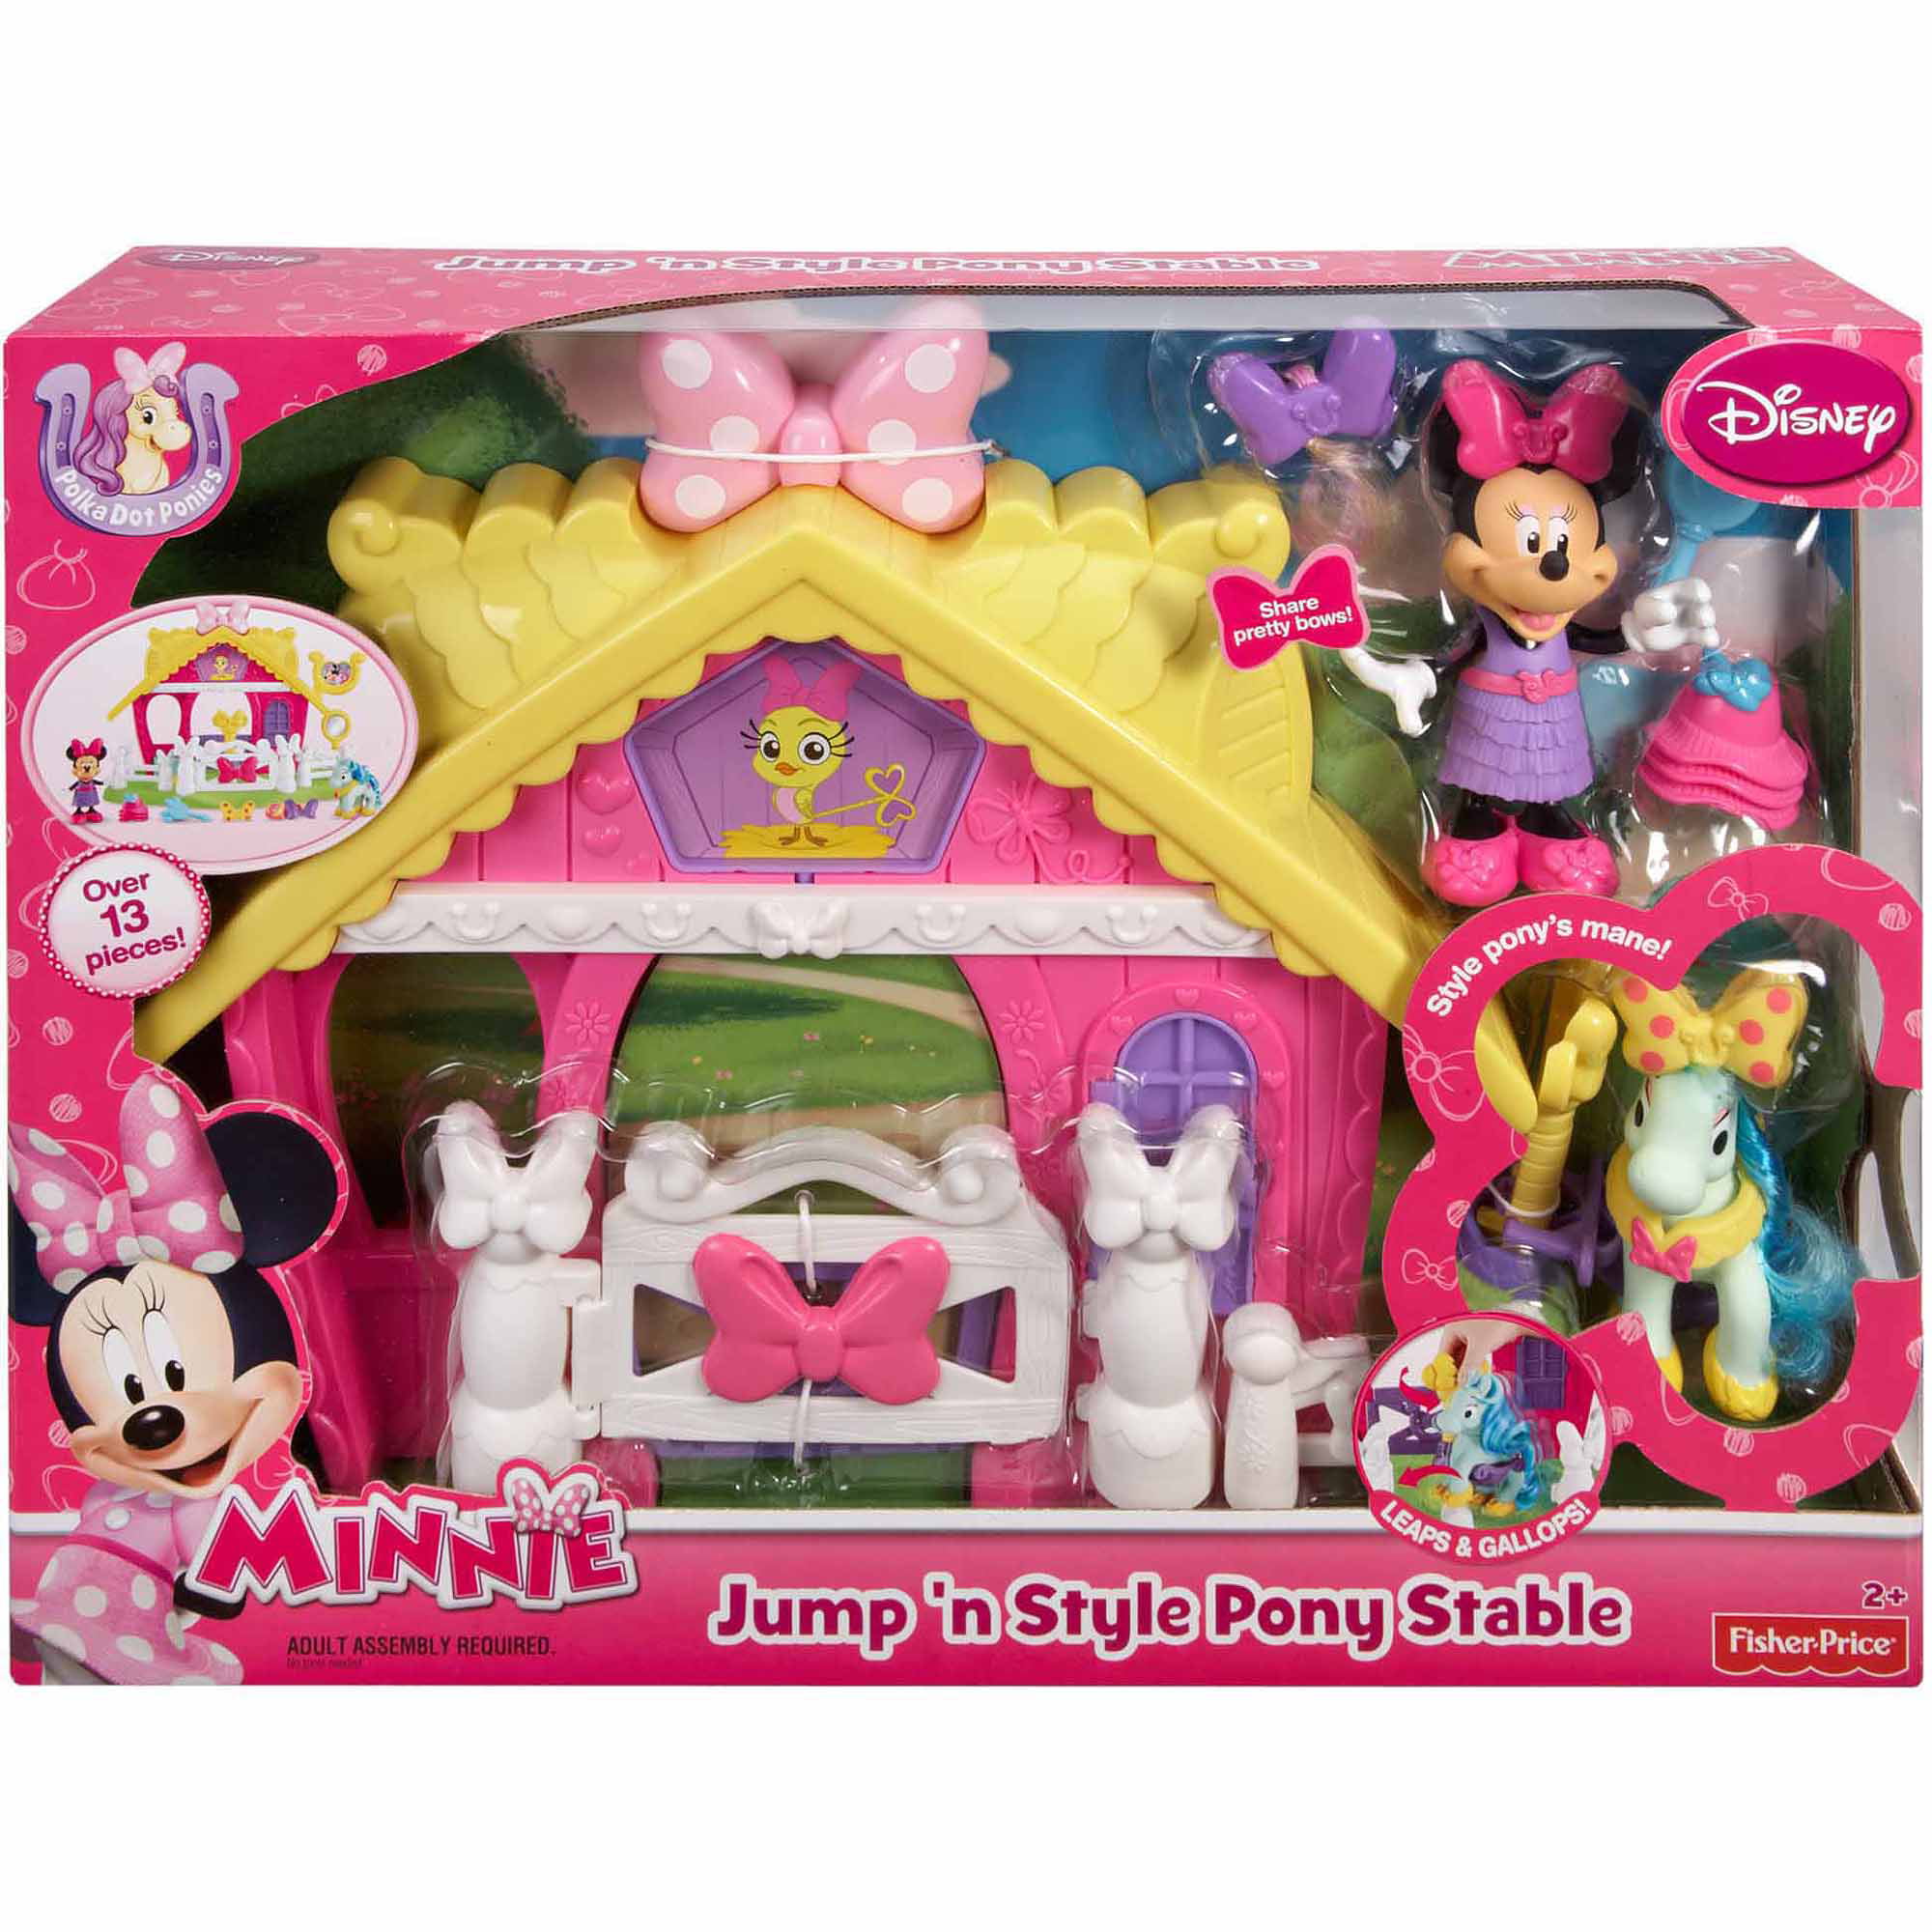 Jump n Style Pony Stable Jump 'n Style Pony Stable Fisher Price BJP02 Fisher-Price Disney Minnie 